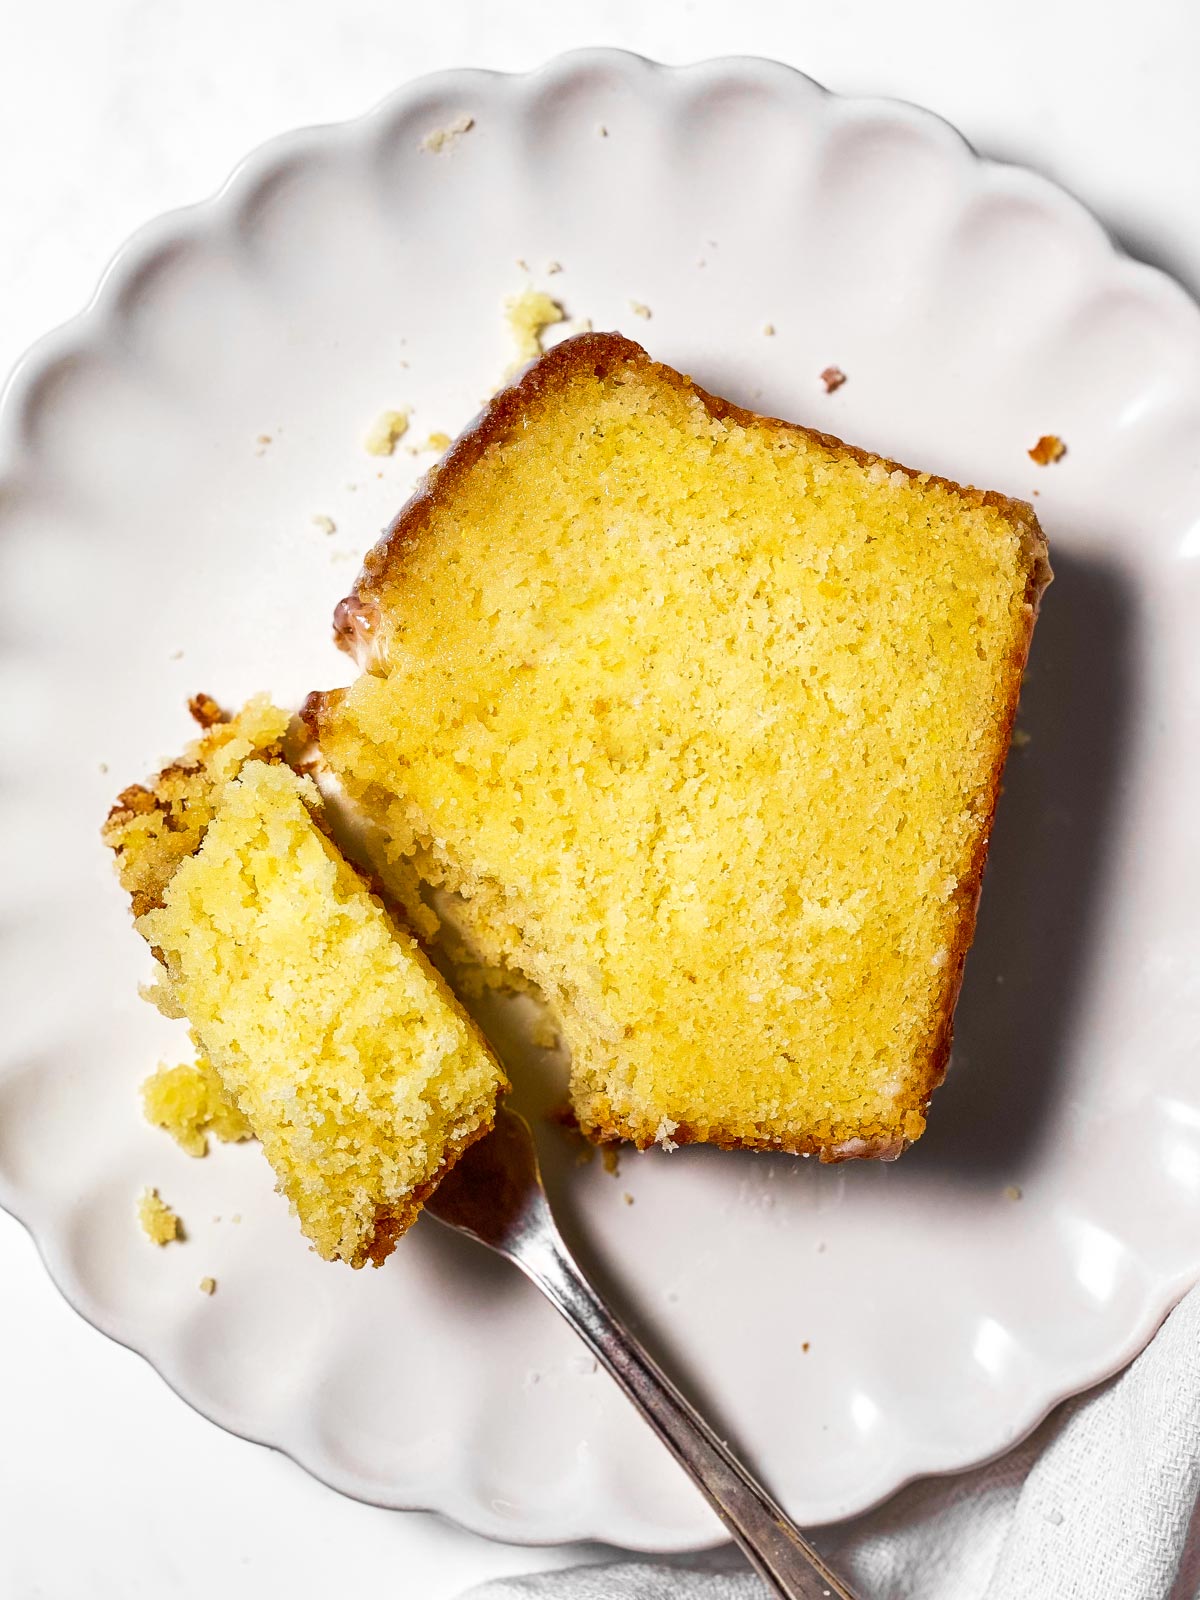 slice of lemon loaf cake on white plate with a fork taking a bite out